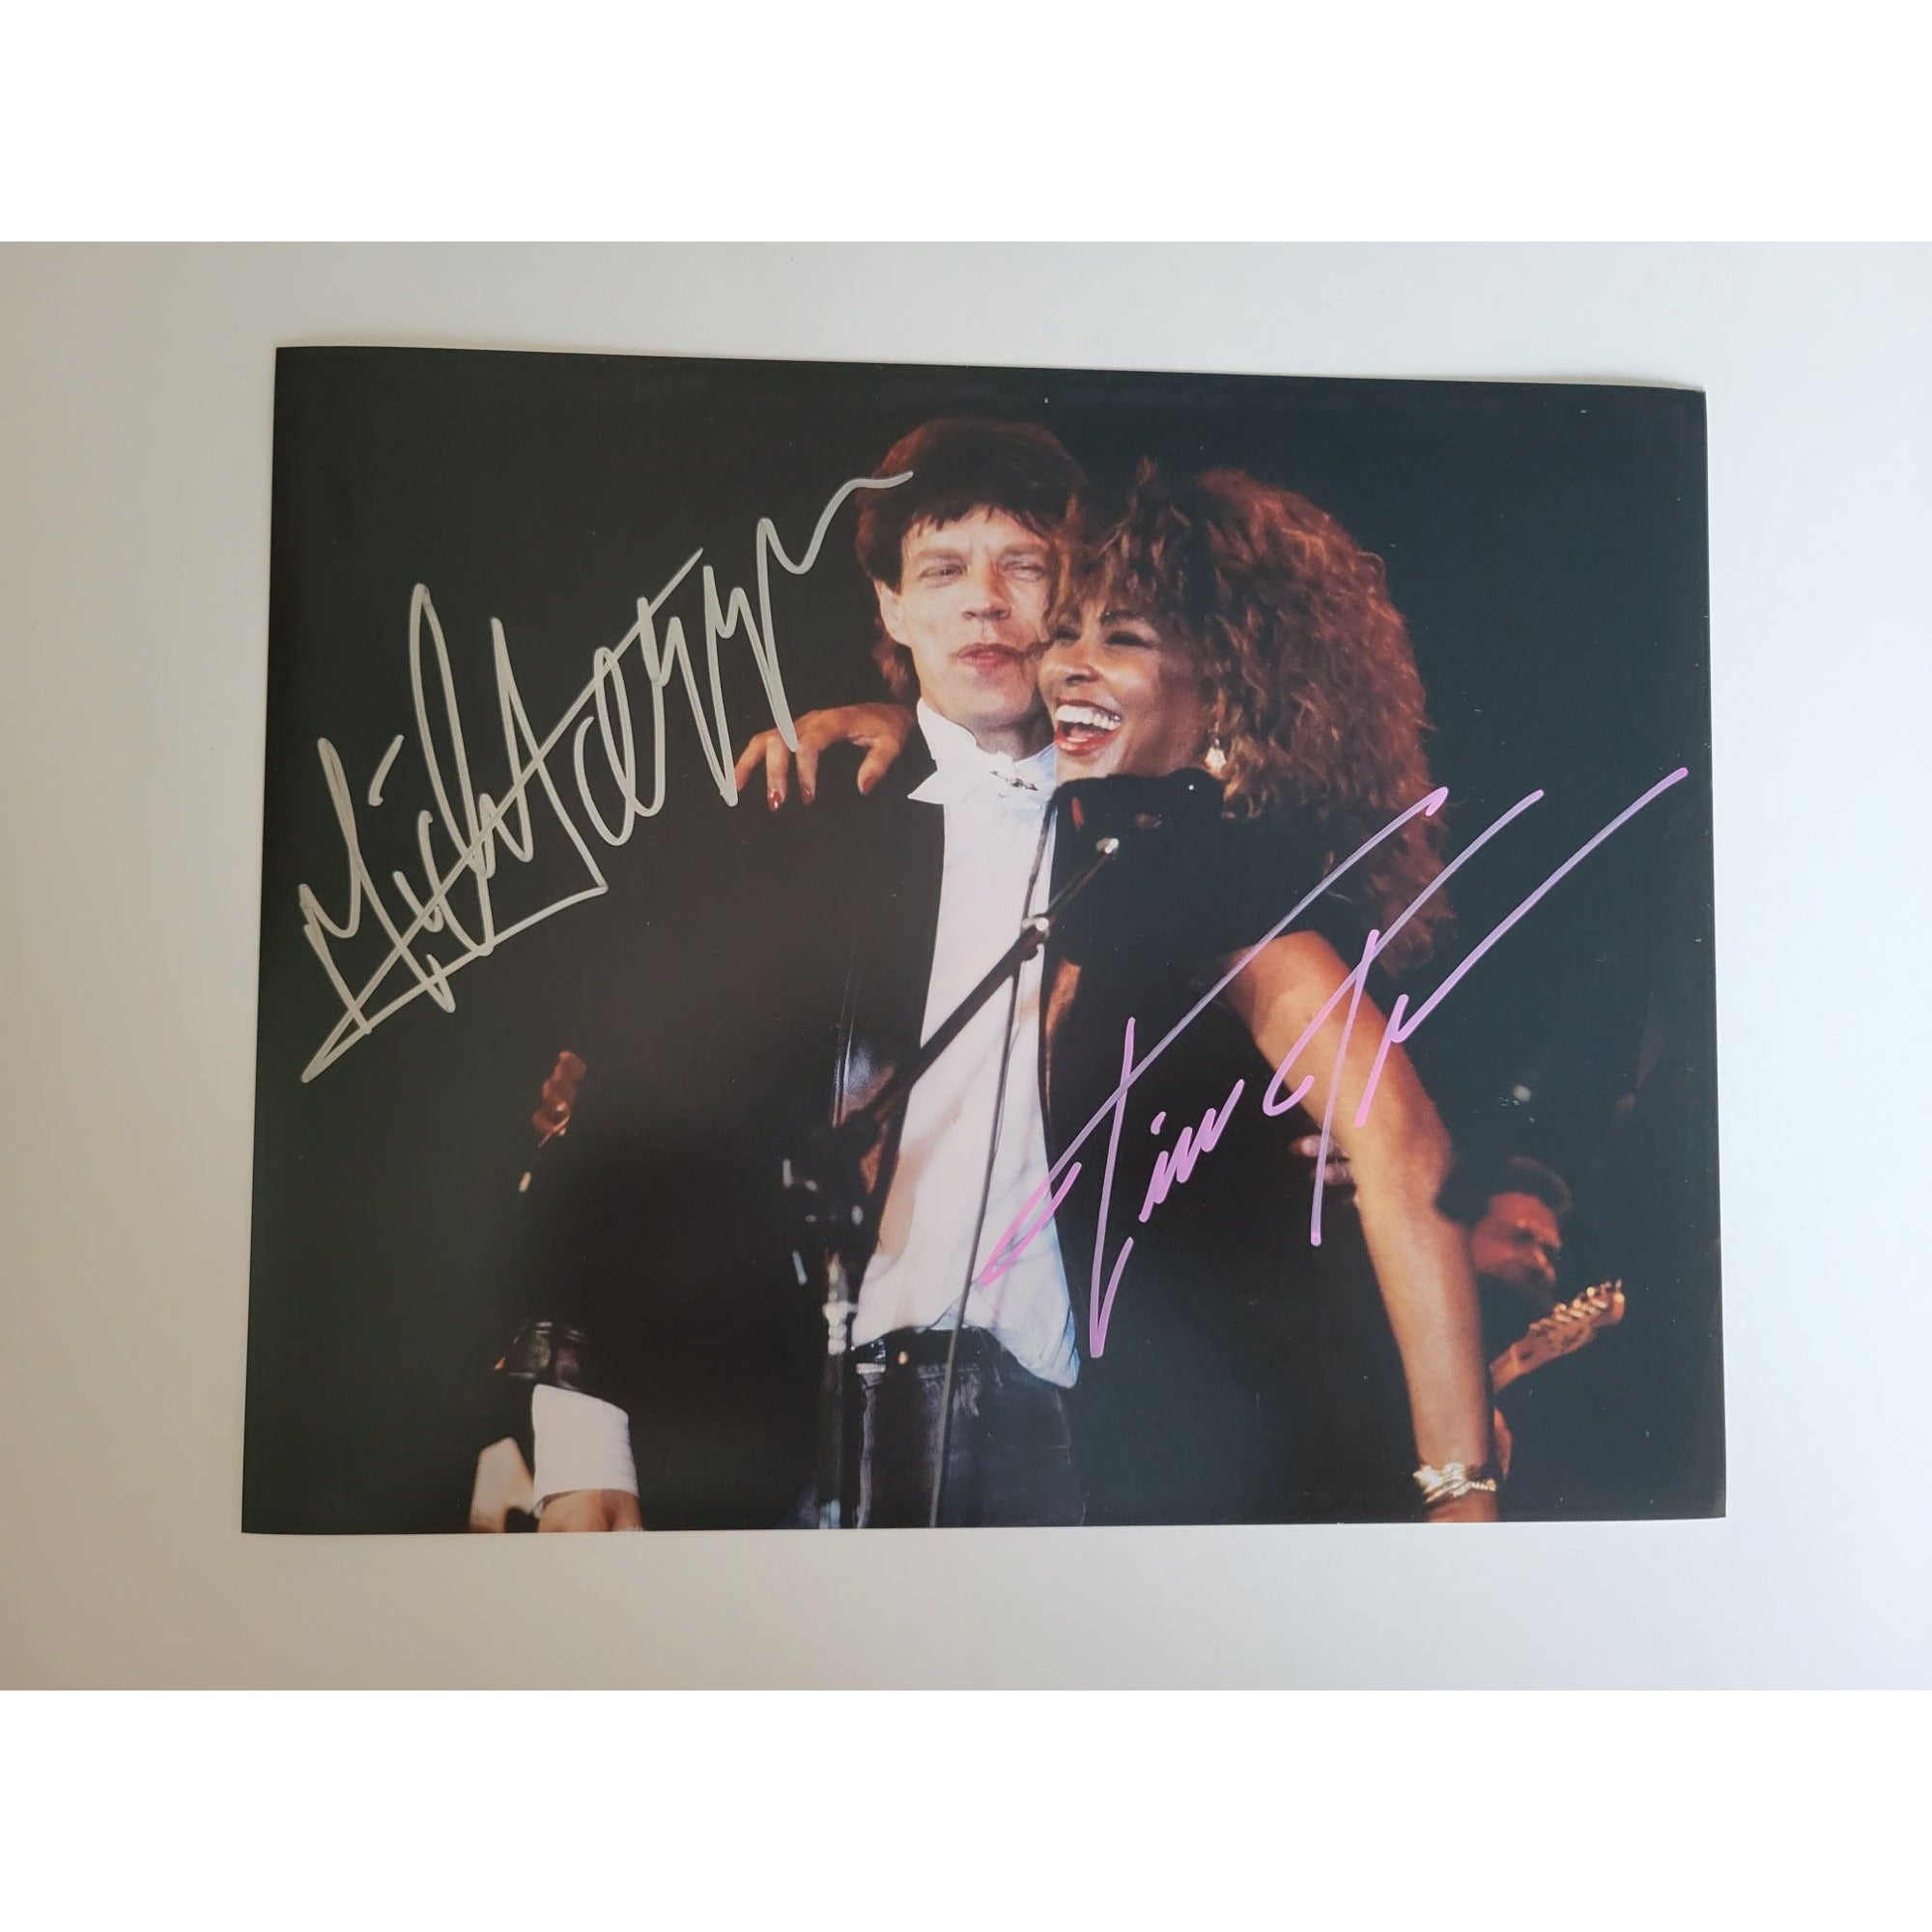 Tina Turner and Mick Jagger 8x10 photo sign with proof